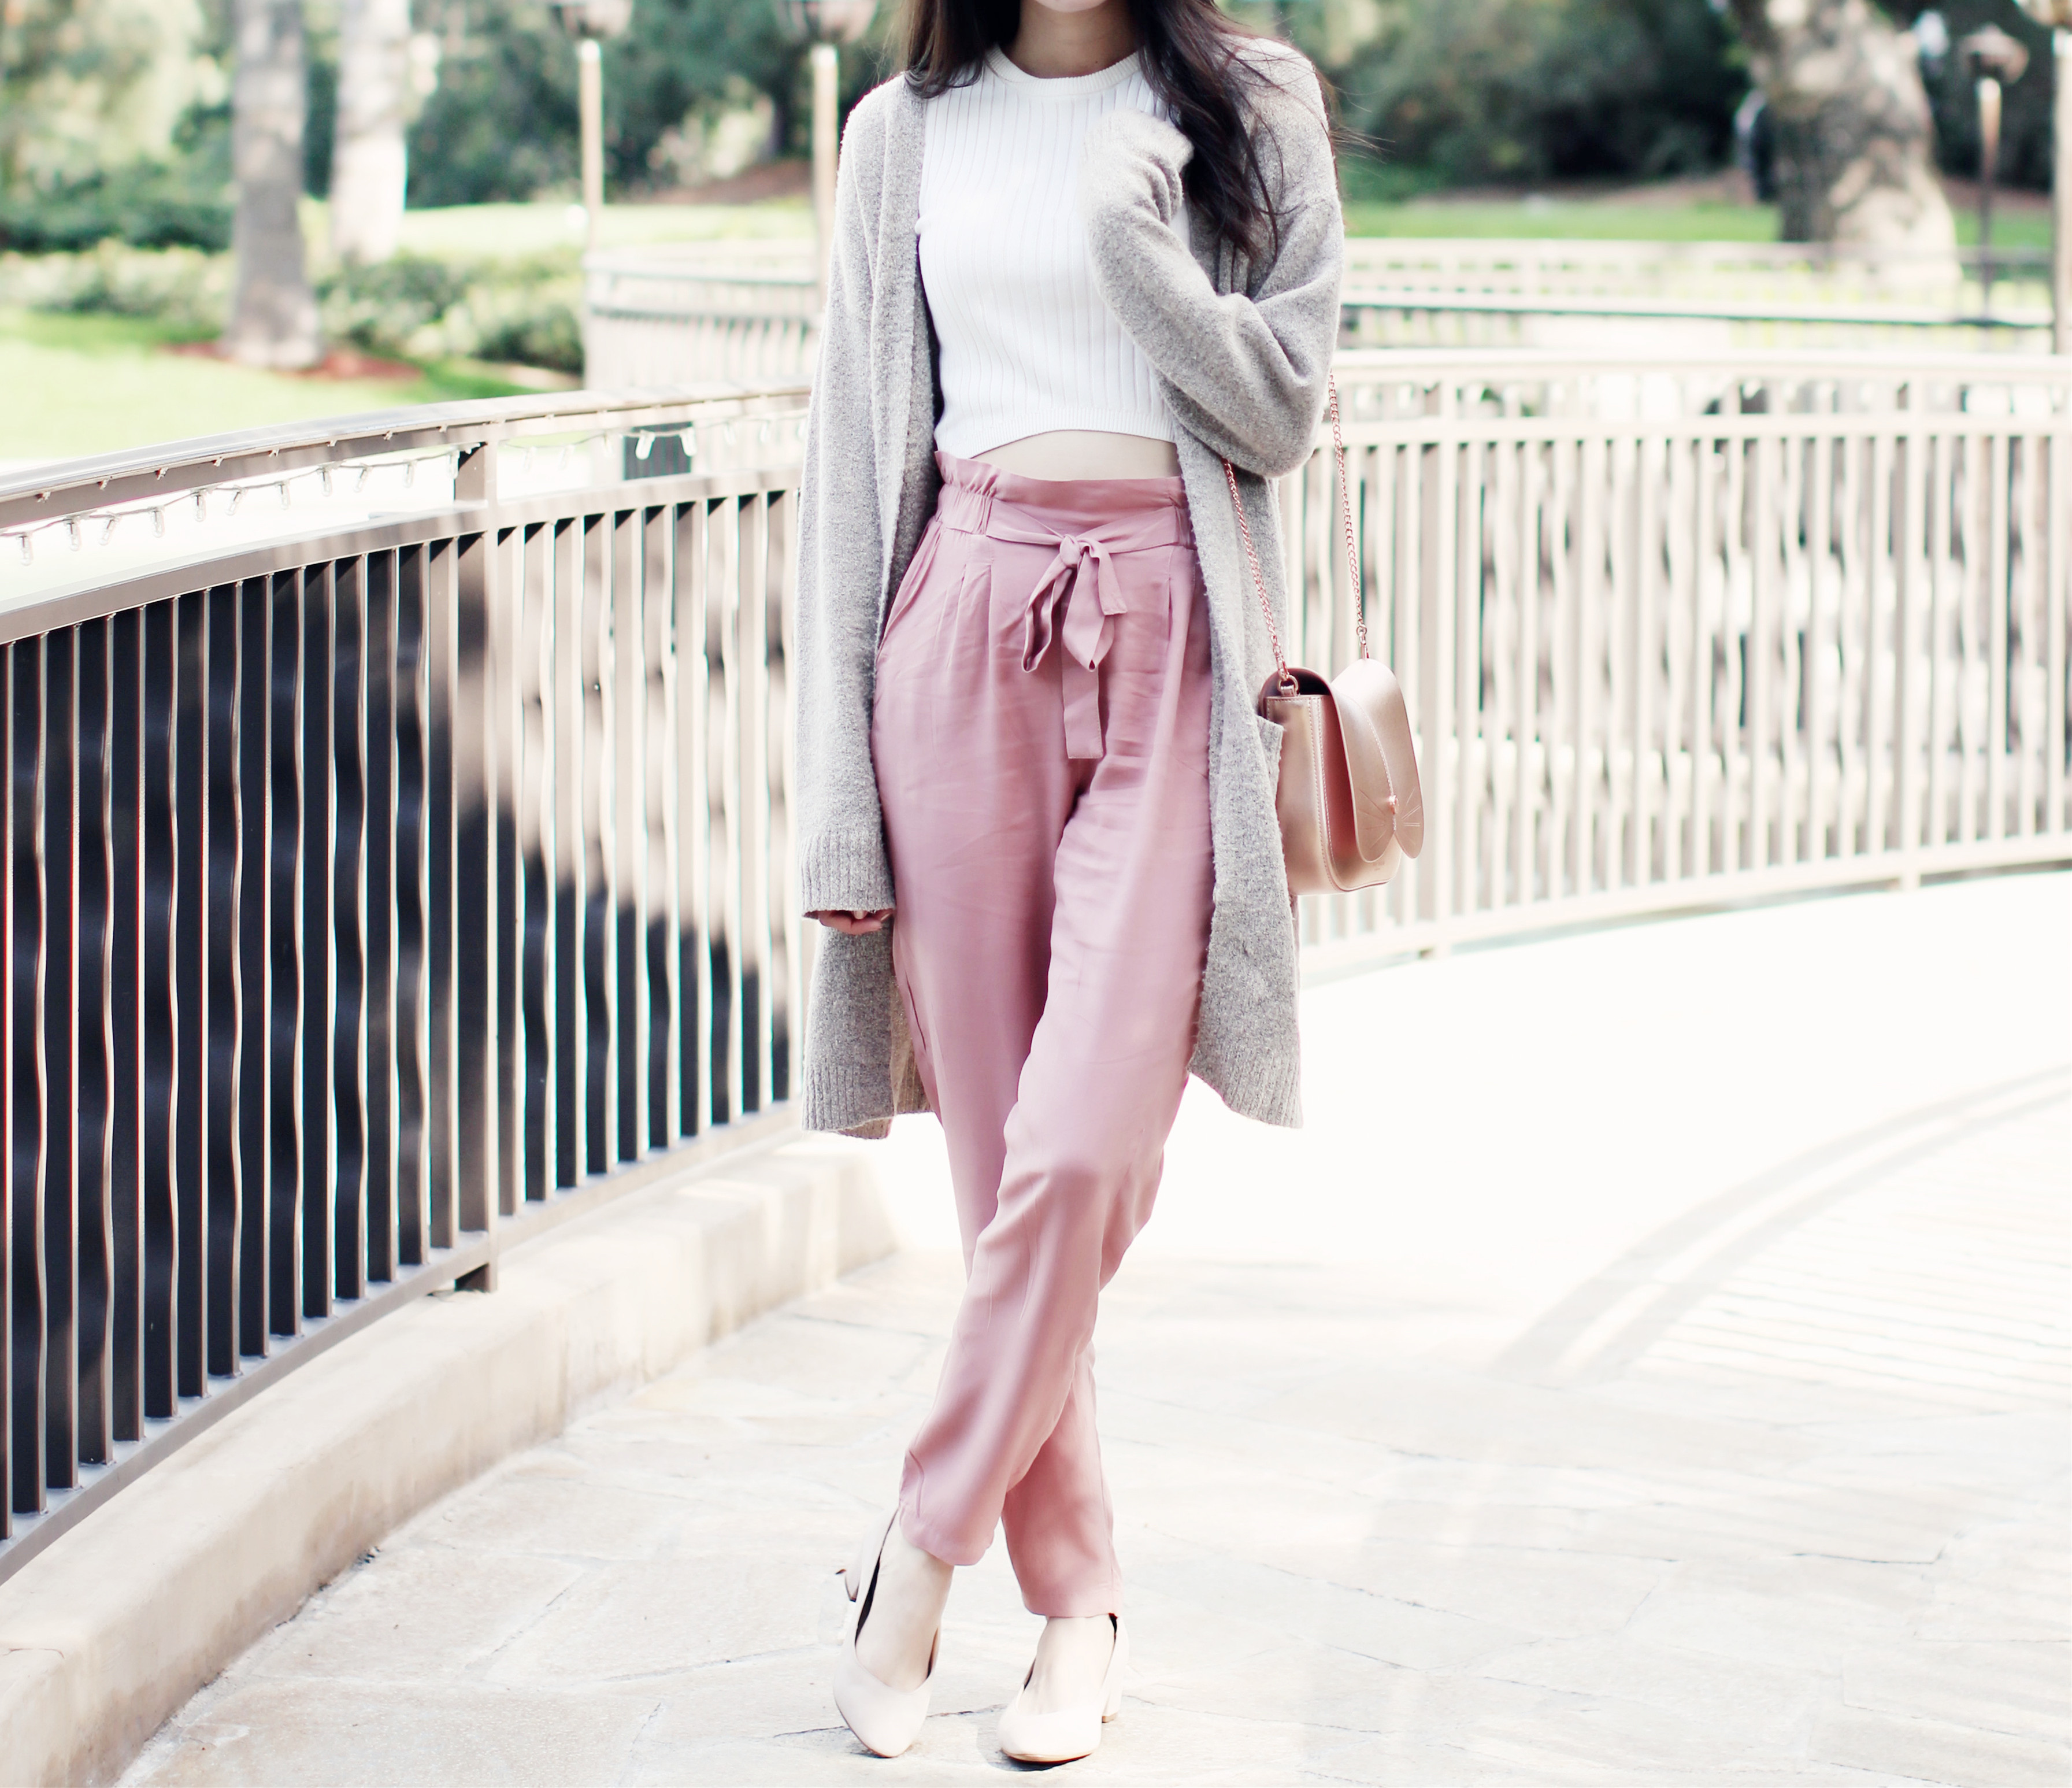 4539-ootd-fashion-style-outfitoftheday-wiwt-streetstyle-forever21-f21xme-anyahindmarch-ninewest-trousers-elizabeeetht-clothestoyouuu